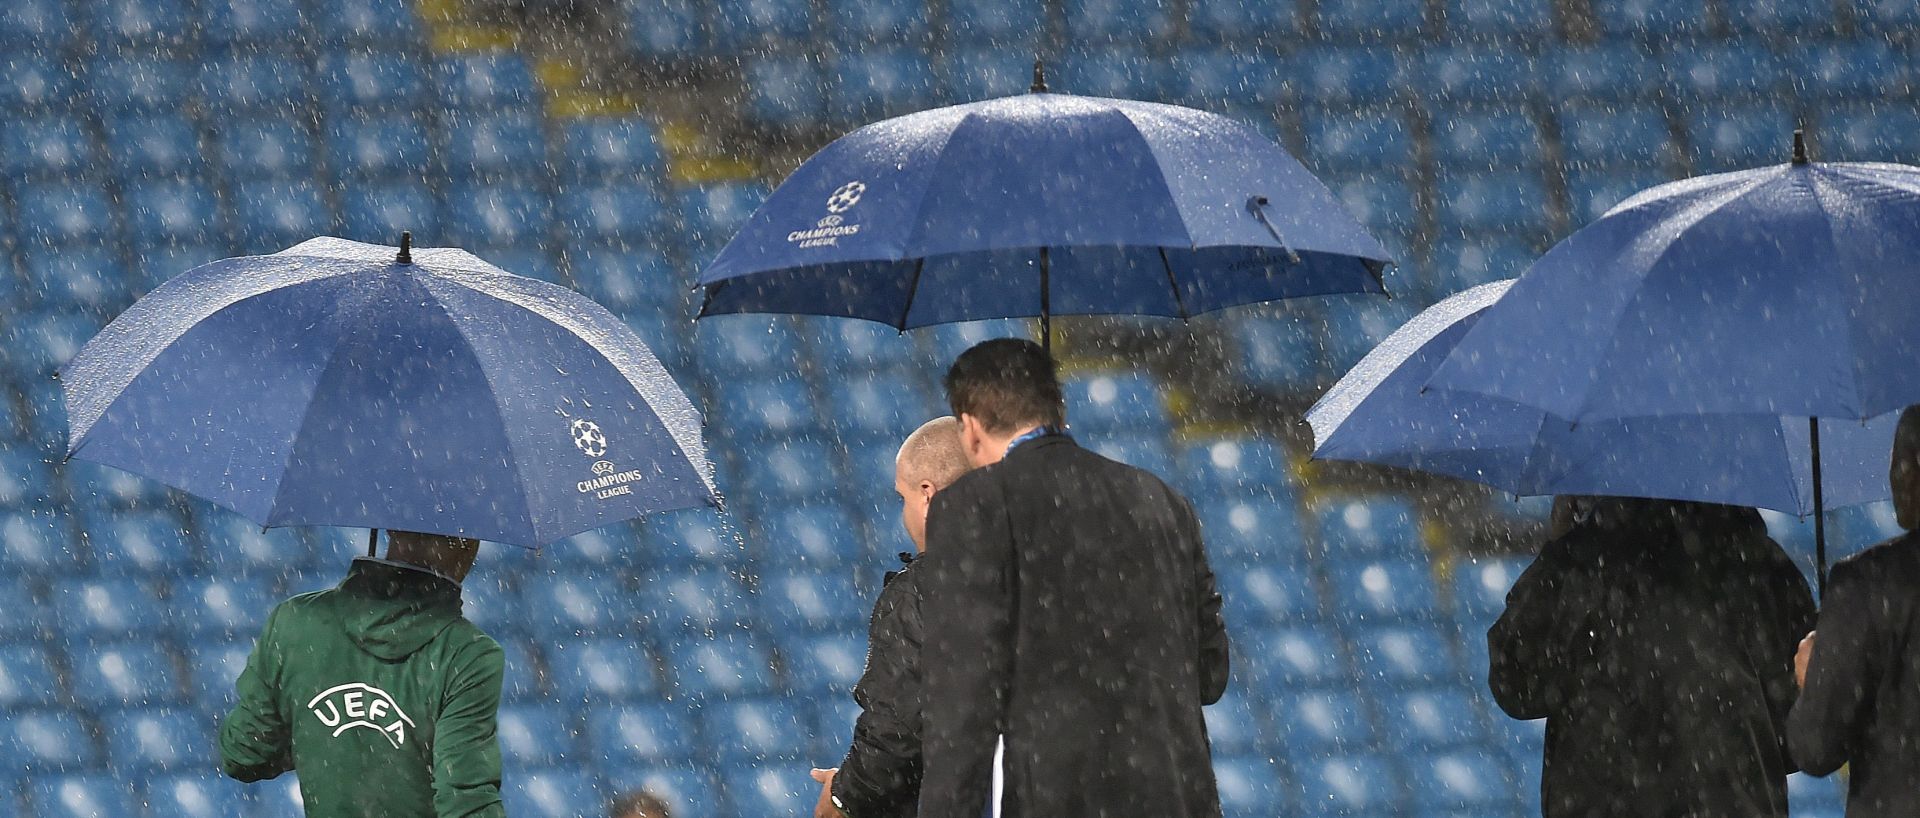 epa05538190 An UEFA official kicks a ball on the pitch as heavy rain falls before the UEFA Champions League Group C match between Manchester City and Borussia Monchengladbach held at the Etihad Stadium in Manchester, Britain, 13 September 2016.  EPA/PETER POWELL